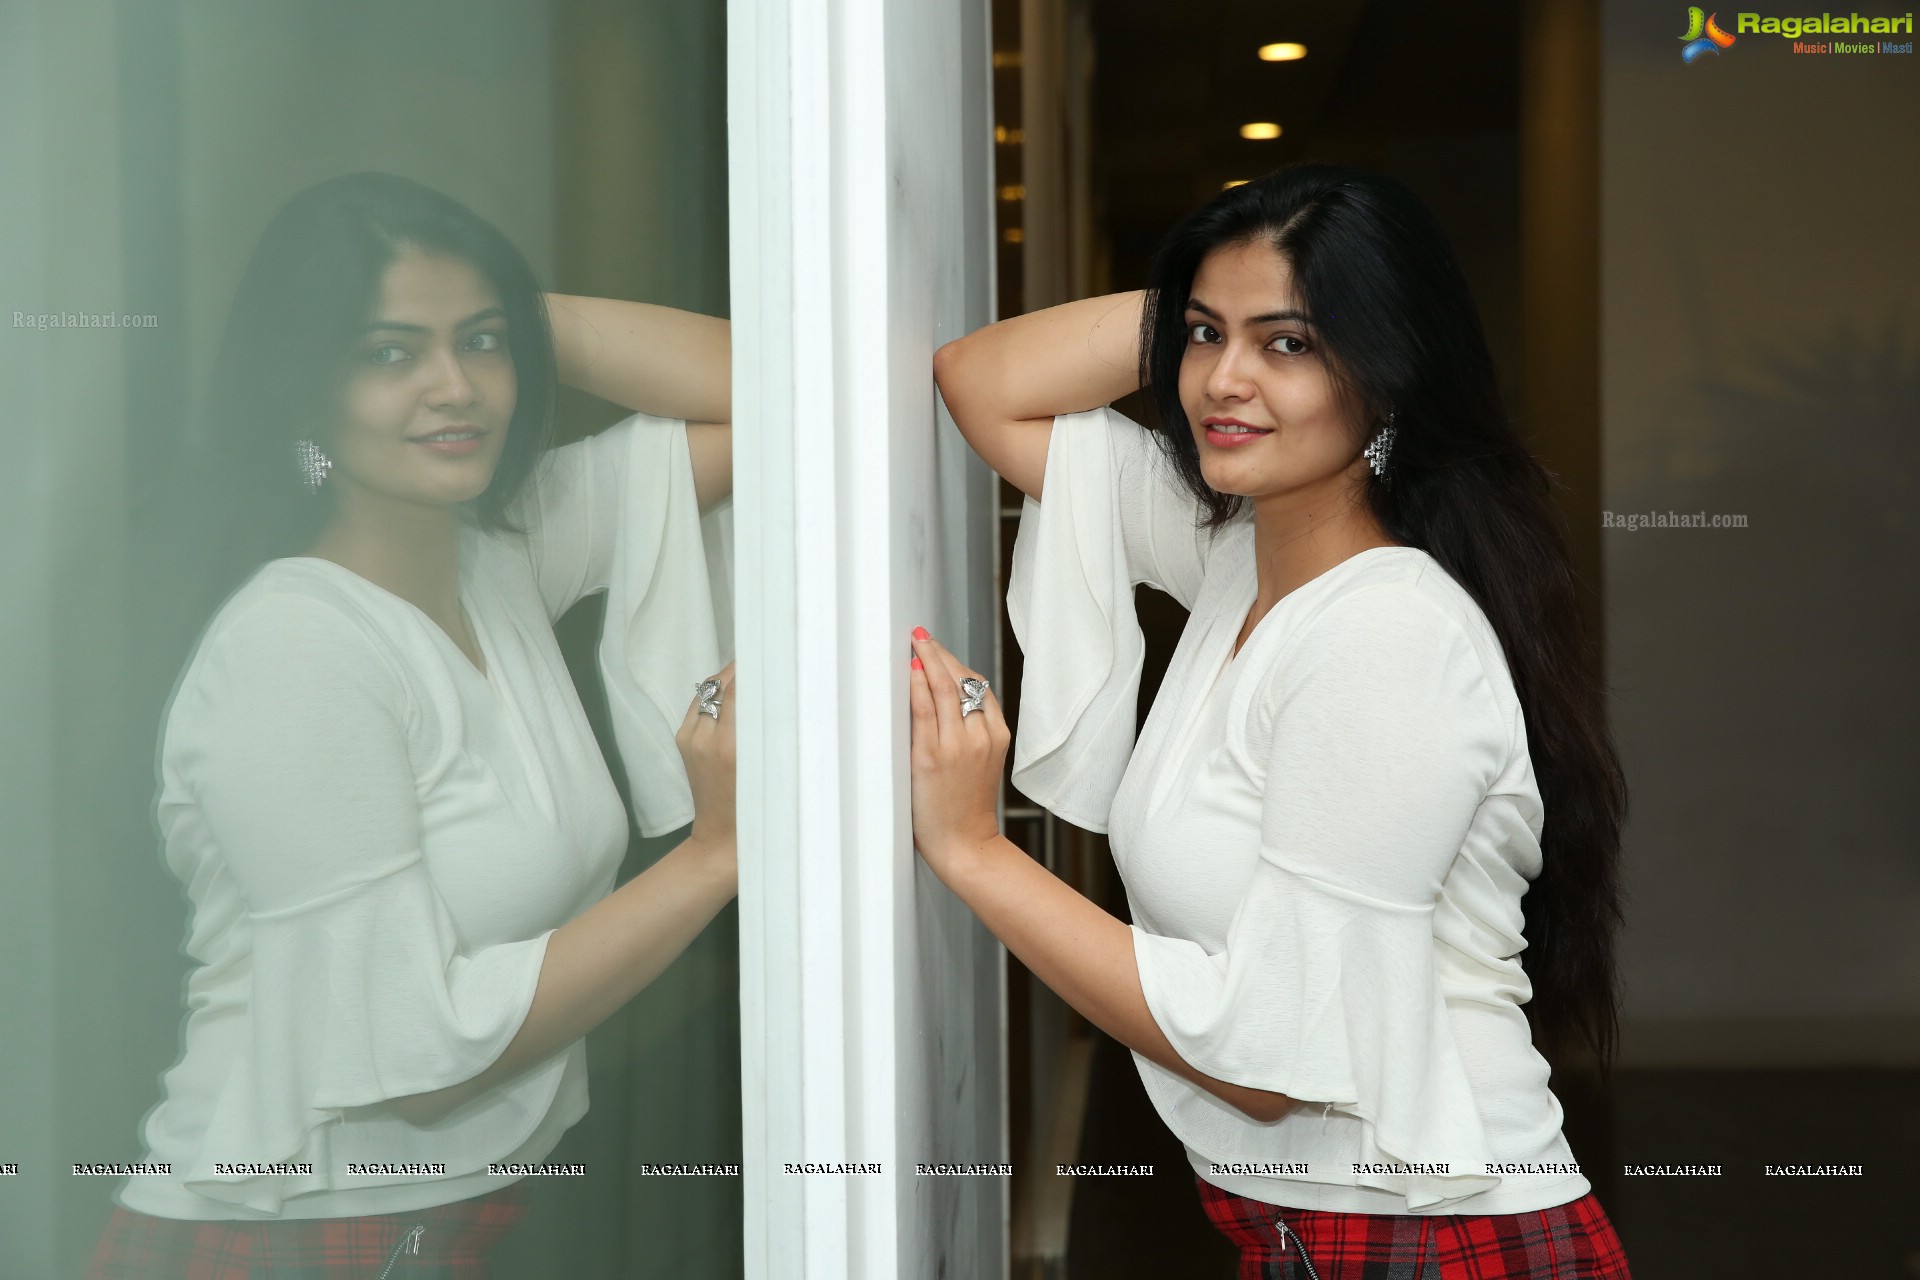 Kalpika Ganesh at Wine Tasting Event by Round Table India 303 (High Definition)